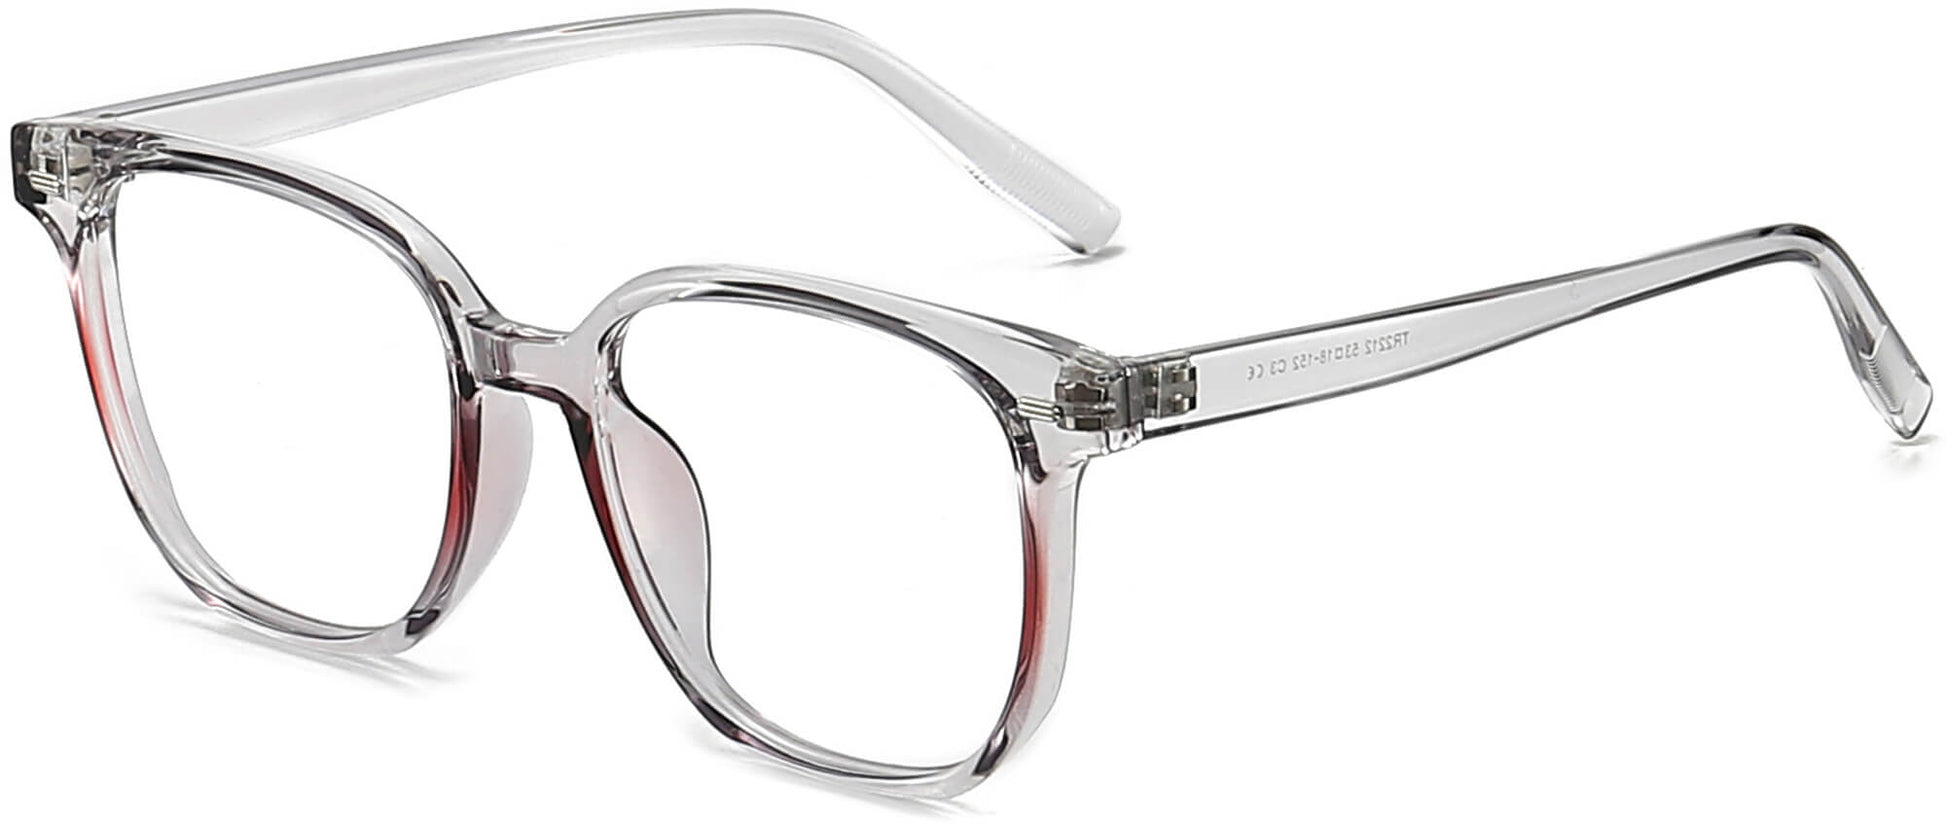 Madelynn Square Gray Eyeglasses from ANRRI, angle view